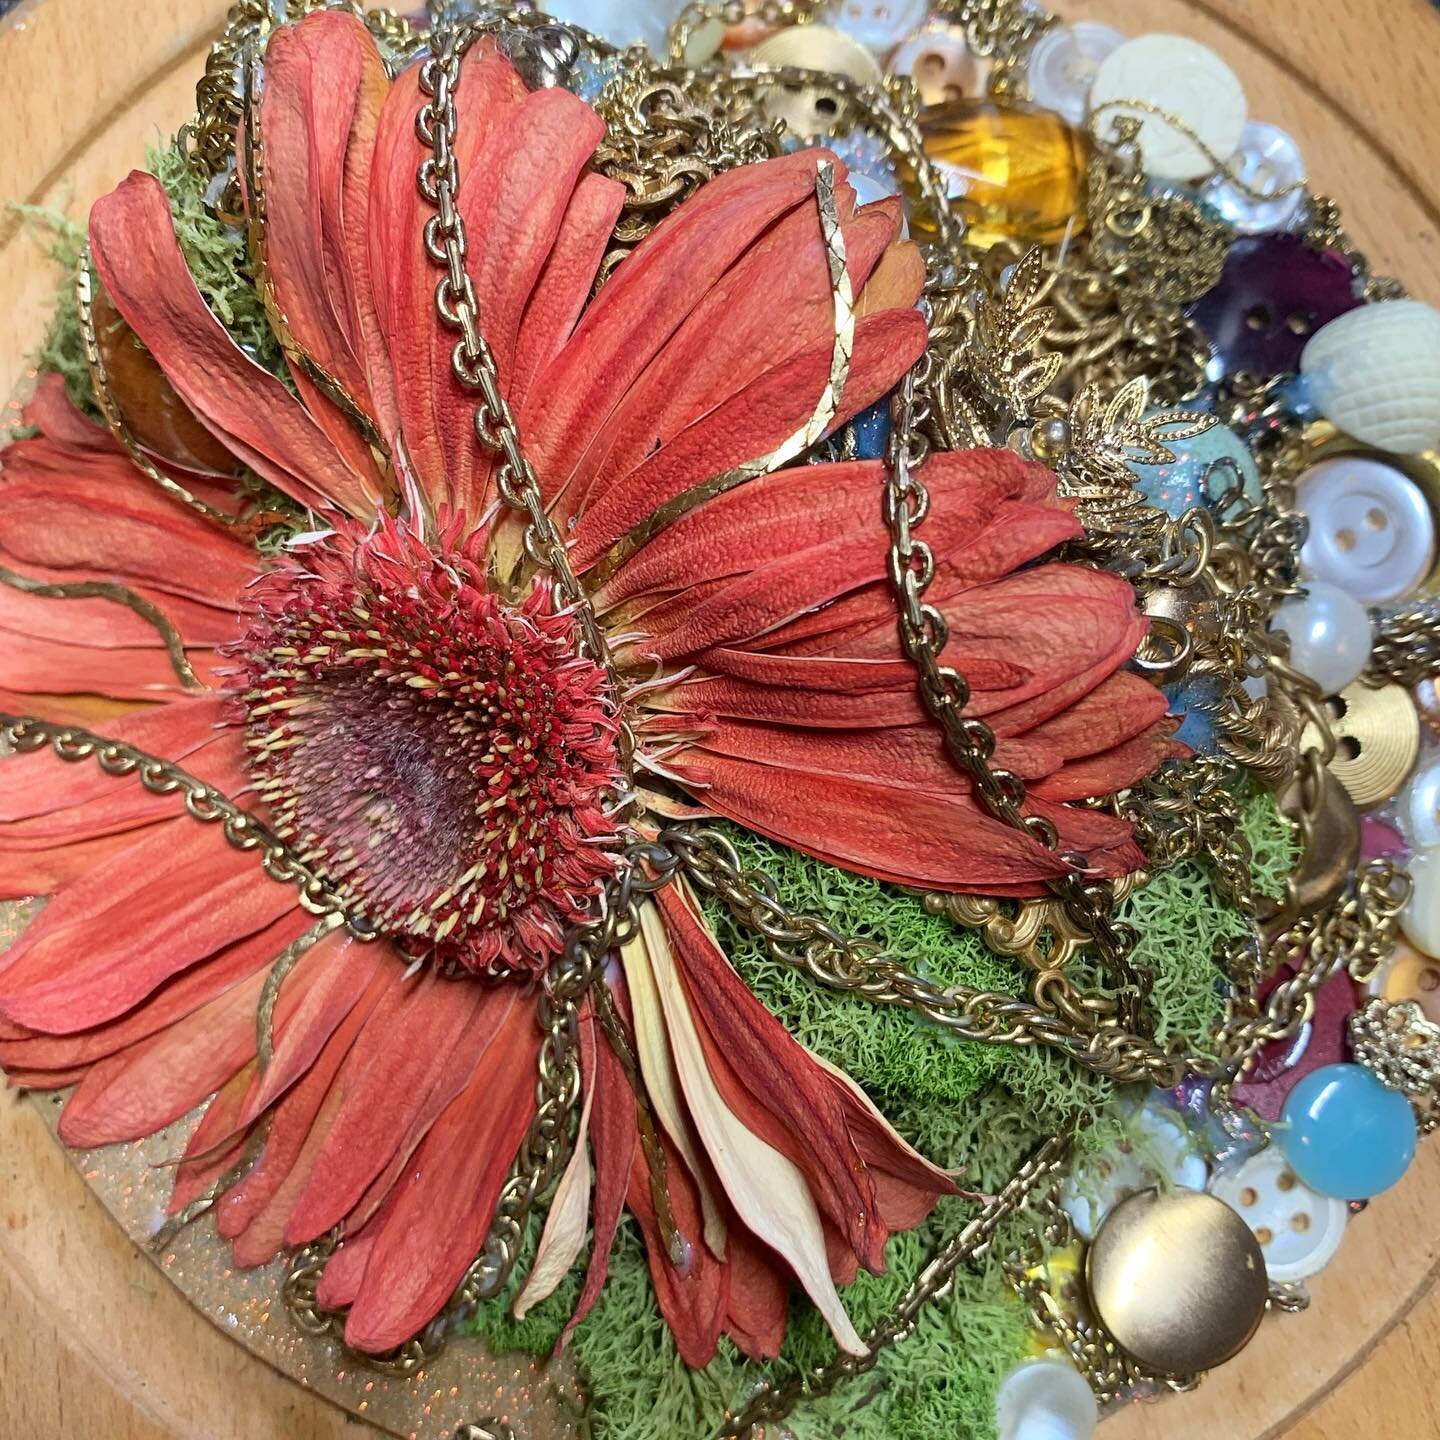 Incorporating preserved flowers left behind by my dear friend Zeta 🌷🌻 #costumejewelry #buttons #assemblageart #preservedflower #goldchain #foundobjects #twodaffodils